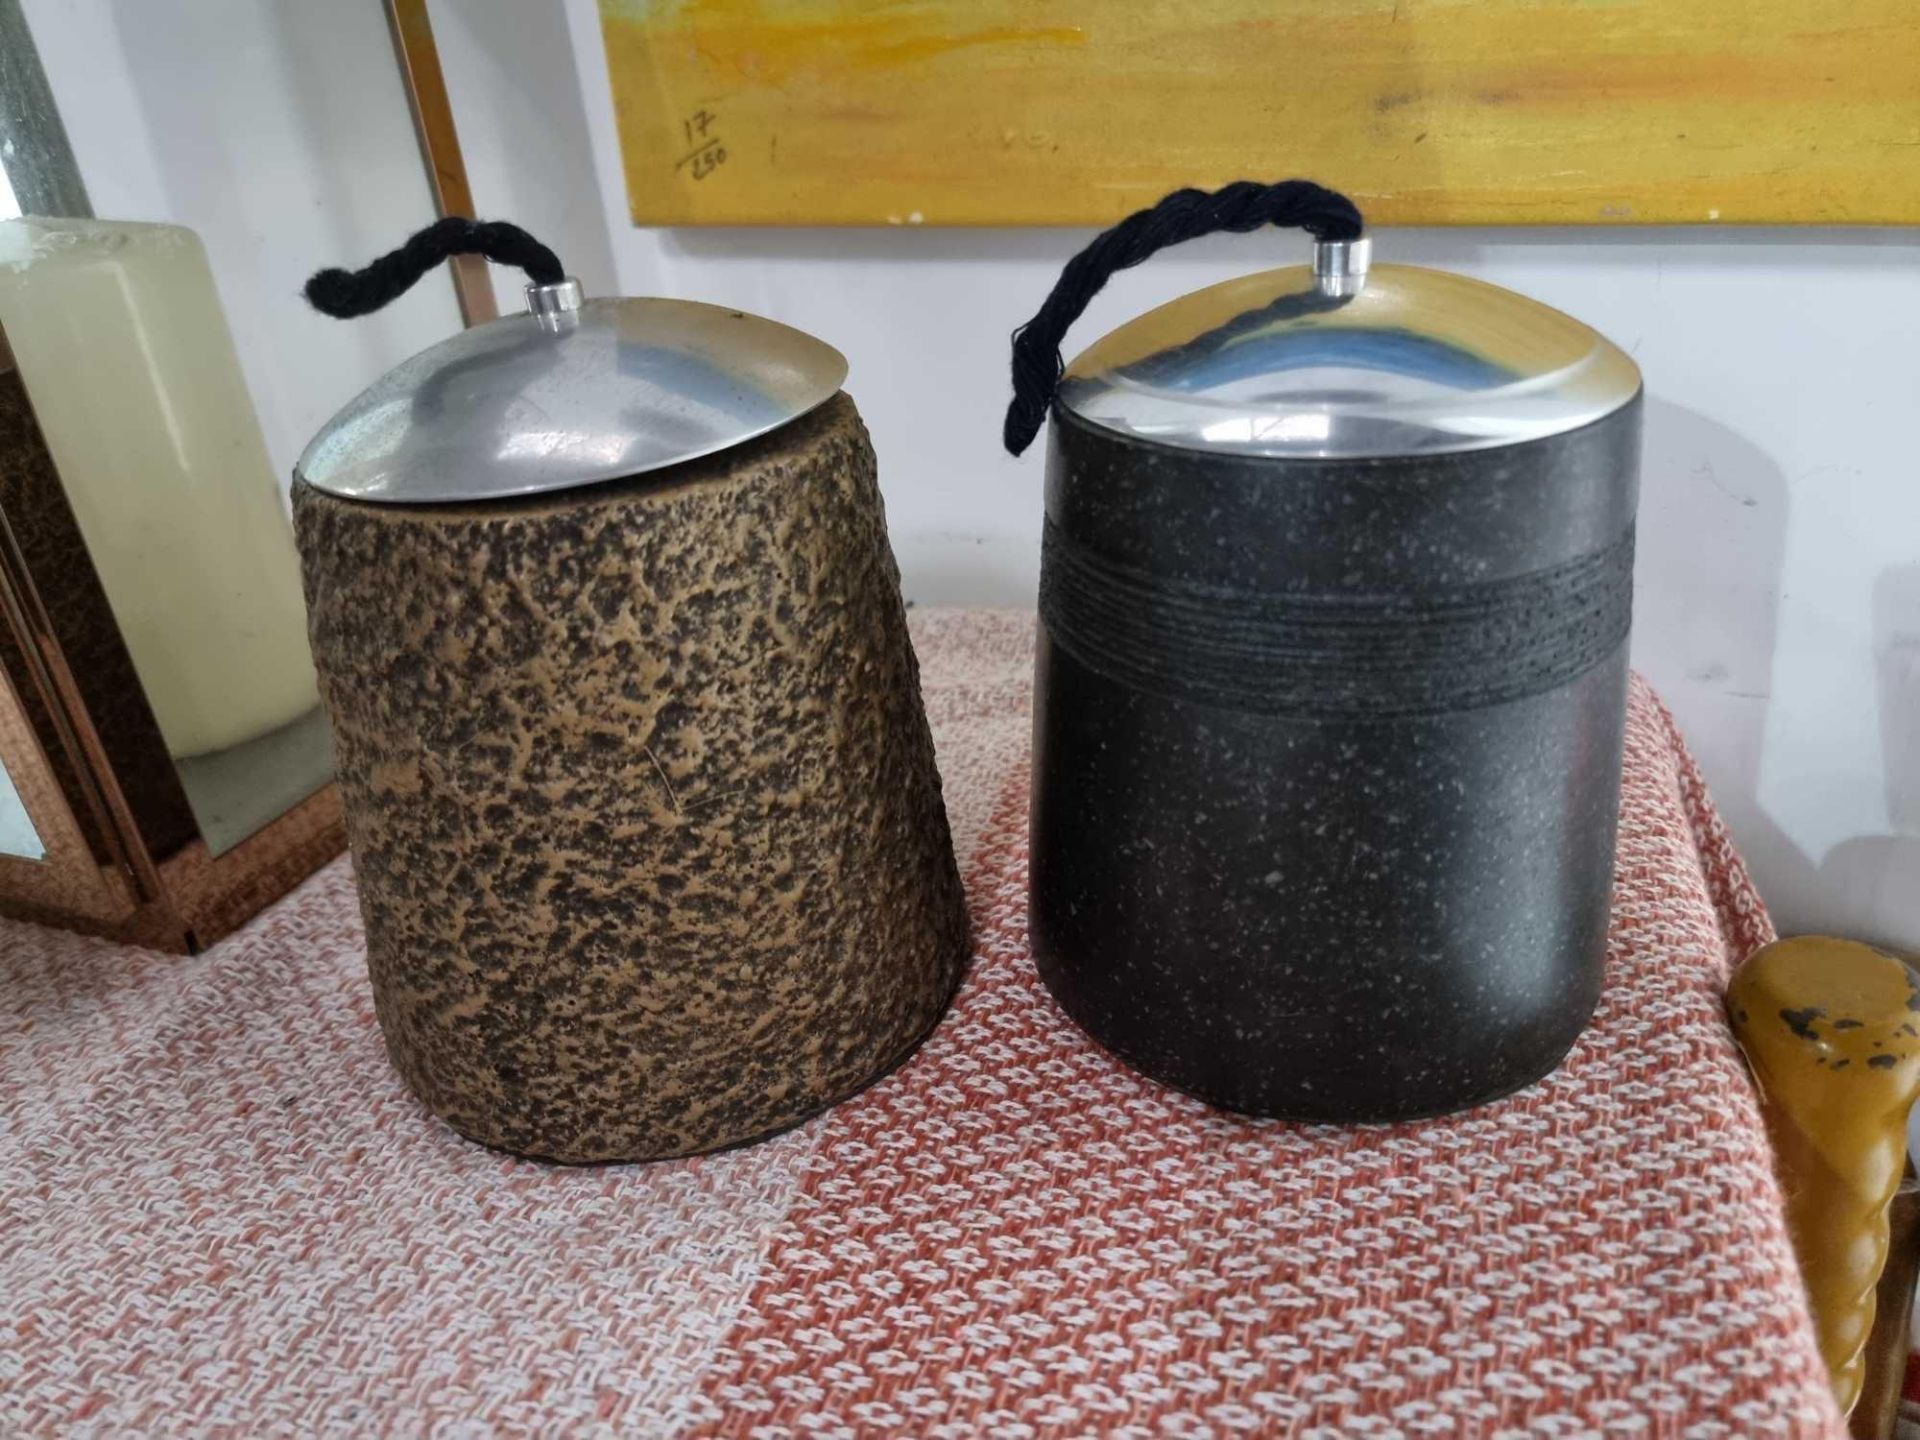 2 x Decorative Stone Pots With Metal Lid With Cotton Rope Wick Potentially A Room Incense Pots - Image 2 of 4